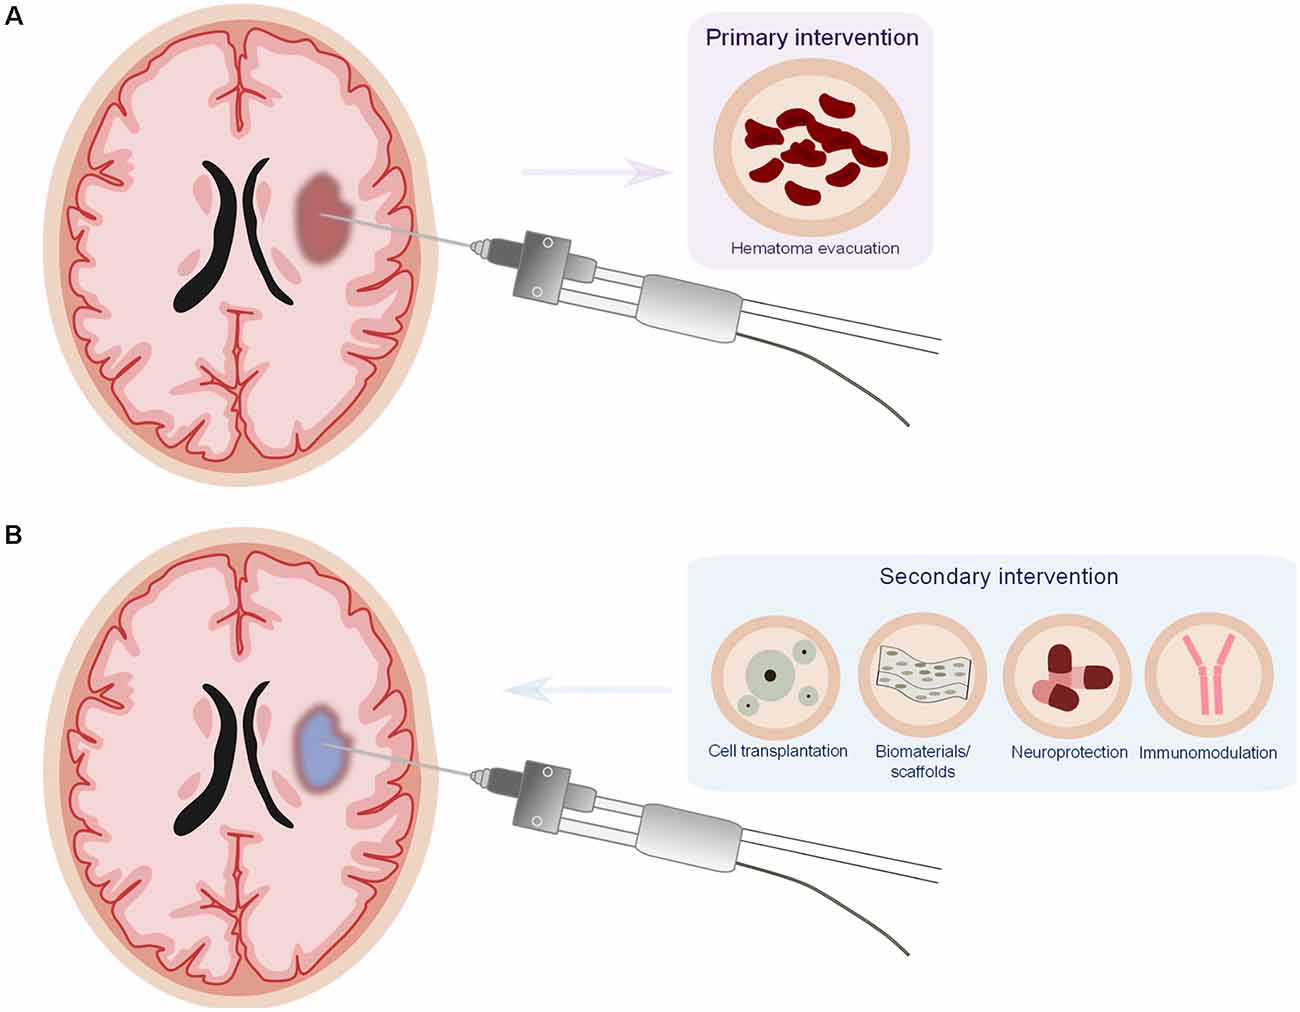 licens tapperhed I mængde Frontiers | New Mechanistic Insights, Novel Treatment Paradigms, and  Clinical Progress in Cerebrovascular Diseases | Aging Neuroscience